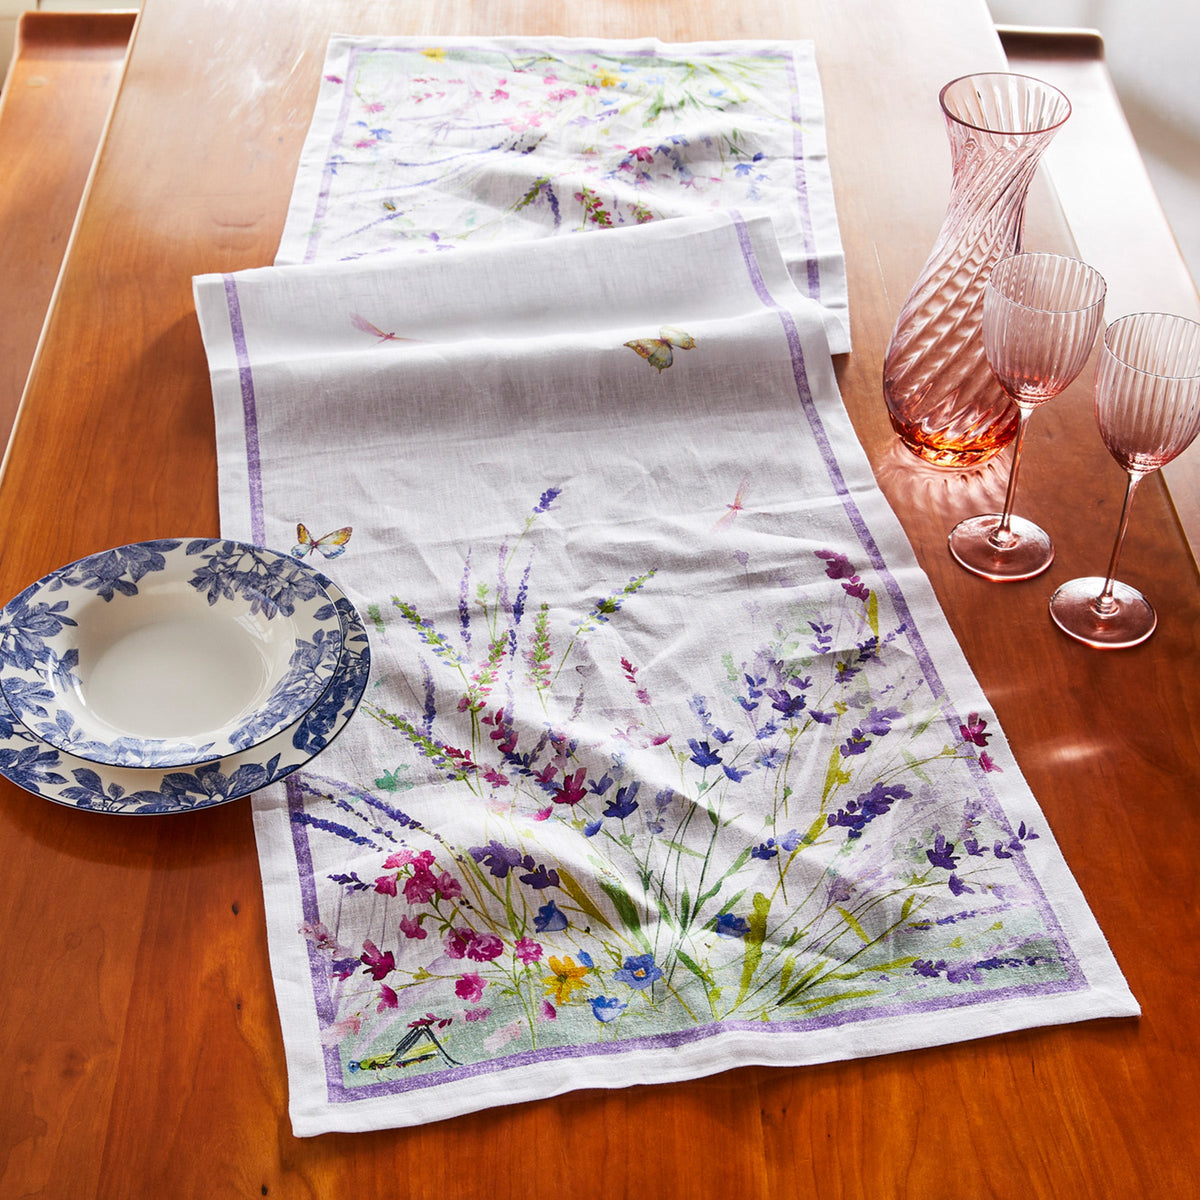 A Meadow Linen Table Runner adorned with wildflowers, hosting a plate and wine glasses by TTT.